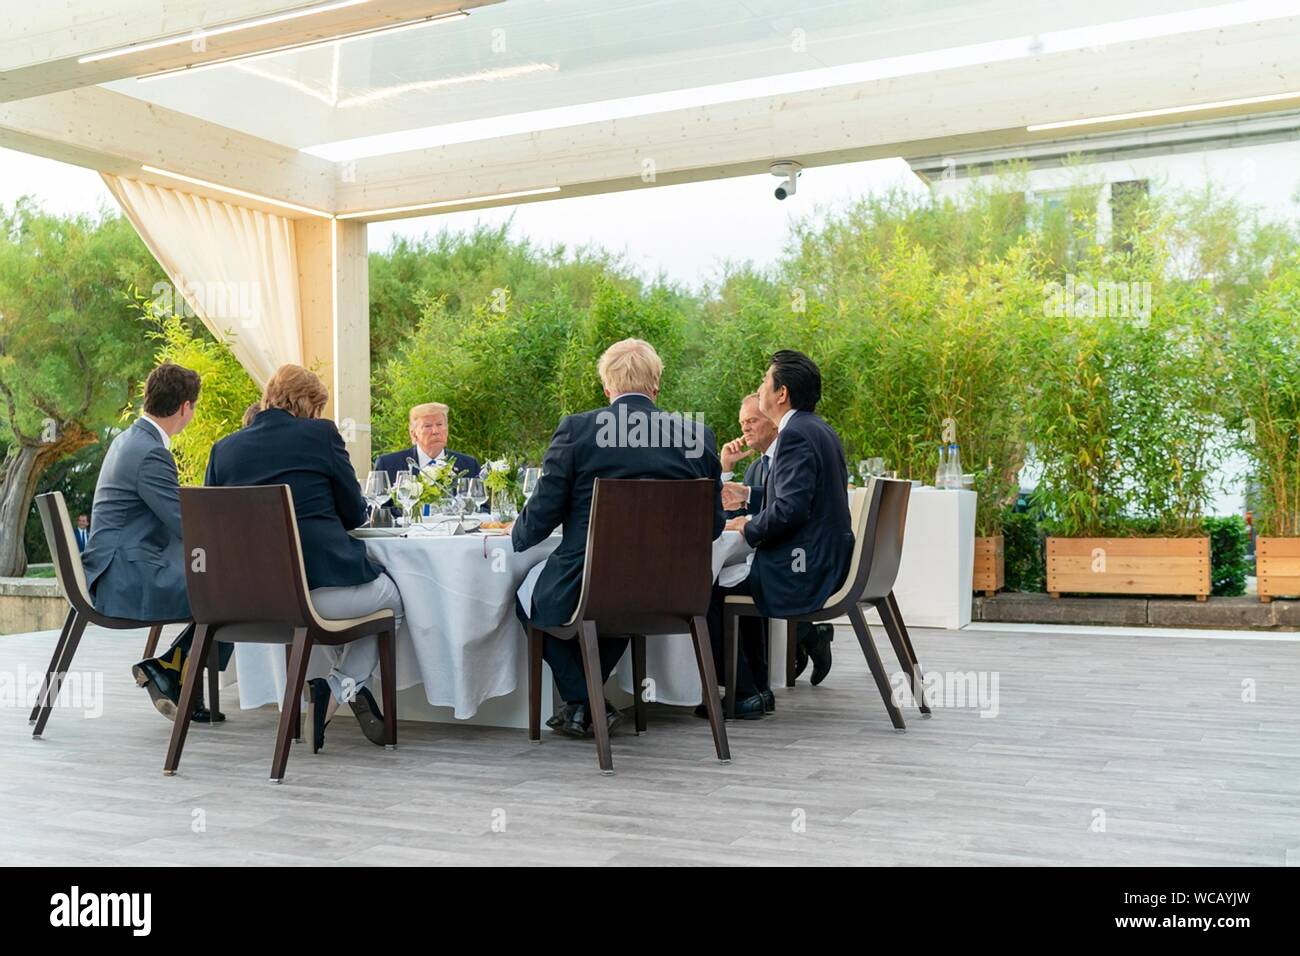 World leaders dinner under the massive Biarritz Lighthouse during the G7 Leaders’ Dinner August 24, 2019 in Biarritz, France. Sitting from left to right are: German Chancellor Angela Merkel, Canadian Prime Minister Justin Trudeau, U.S. President Donald Trump, European Council President Donald Tusk, Japanese Prime Minister Shinzo Abe and British Prime Minister Boris Johnson. Stock Photo